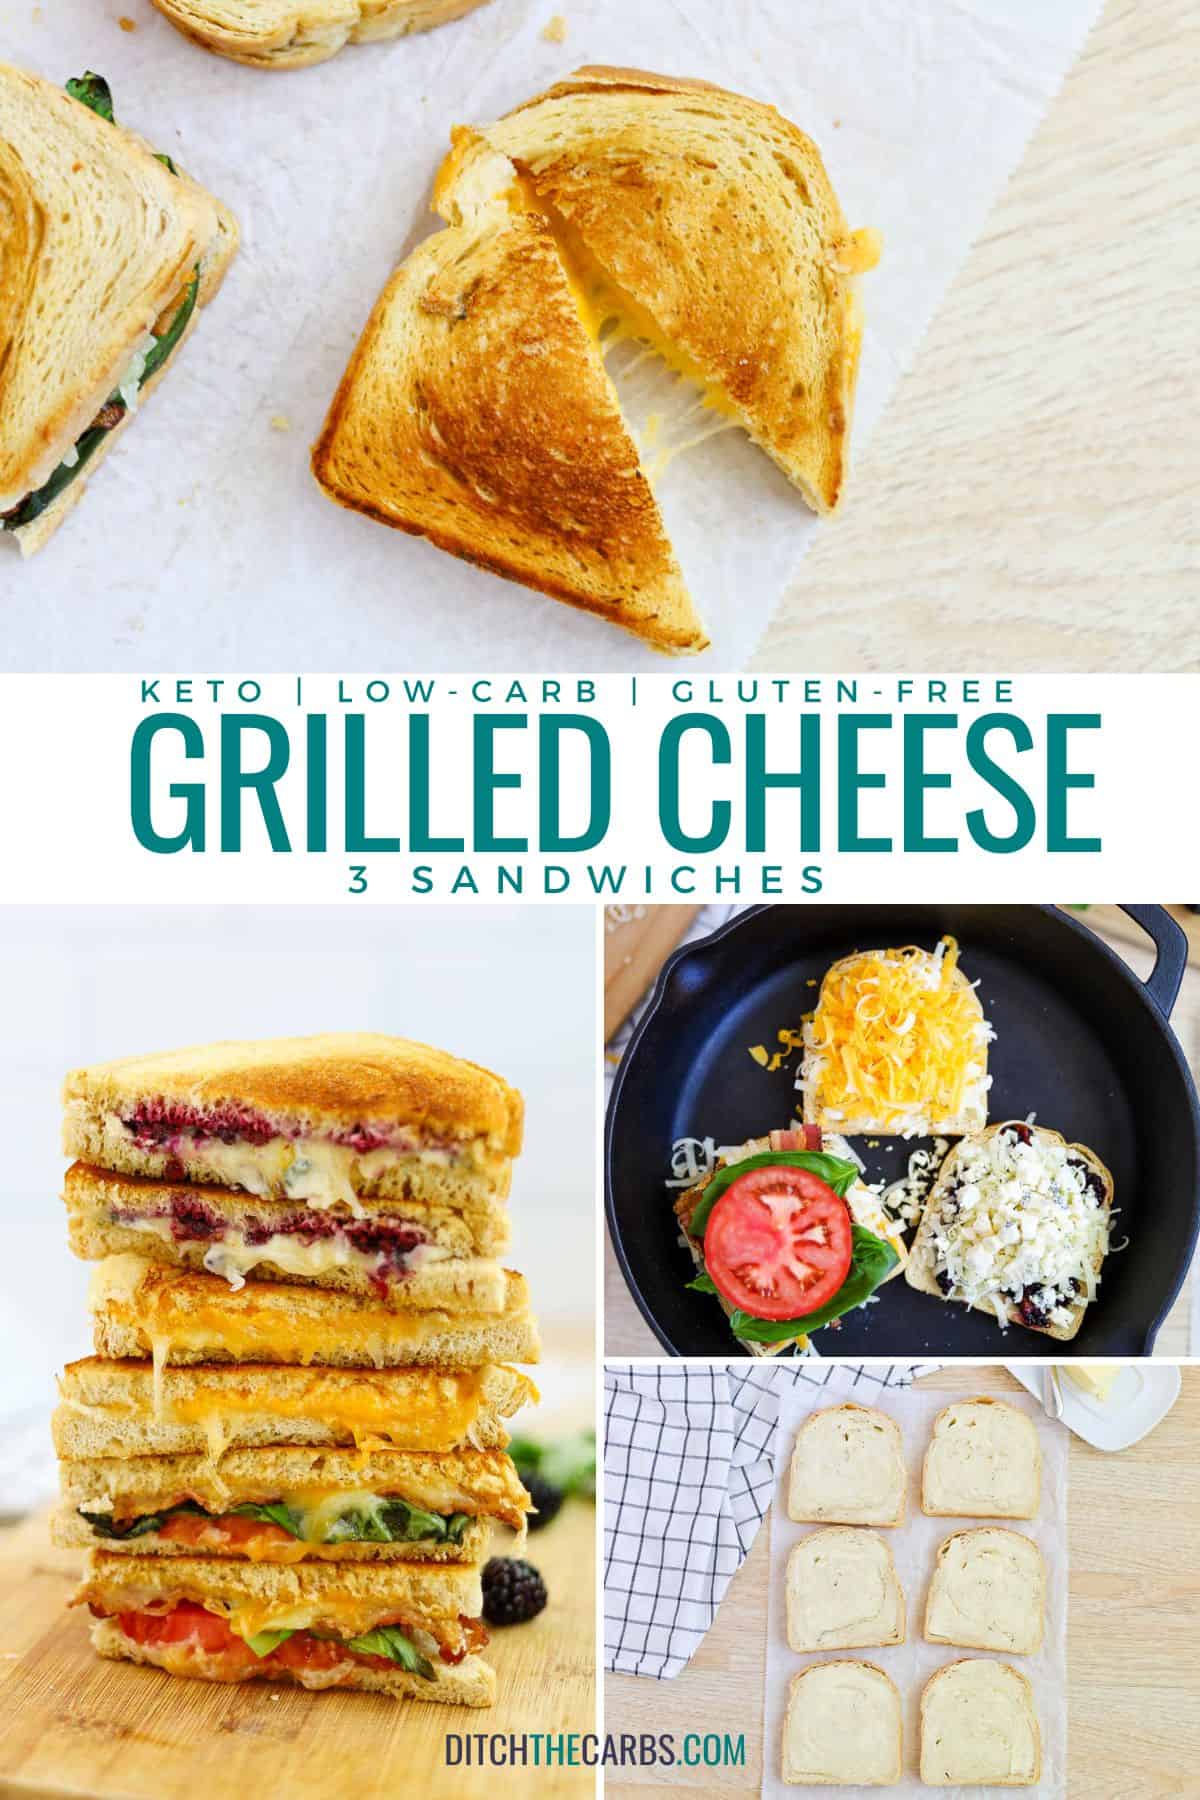 A collage showing keto grilled cheese sandwiches being made at various stages.